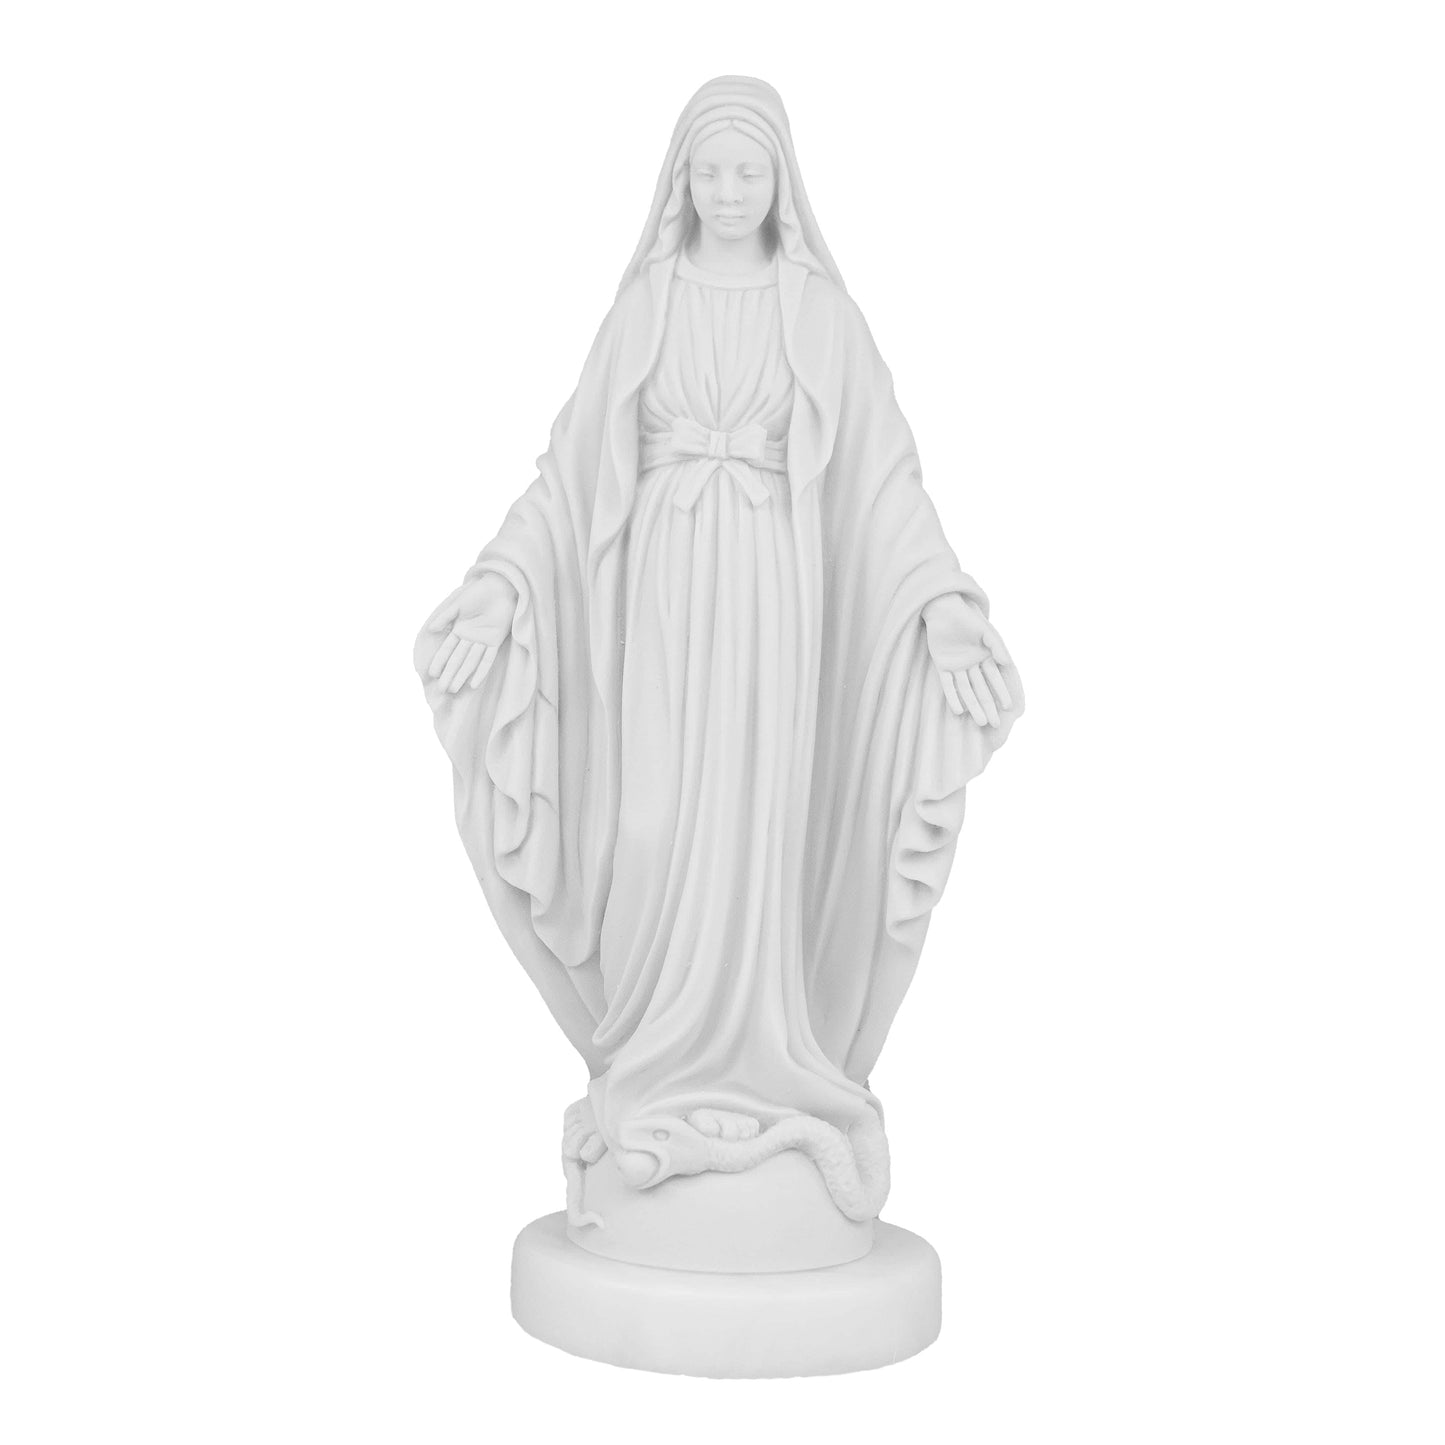 MONDO CATTOLICO 18 cm White Marble Dust Statue of Miraculous Mary